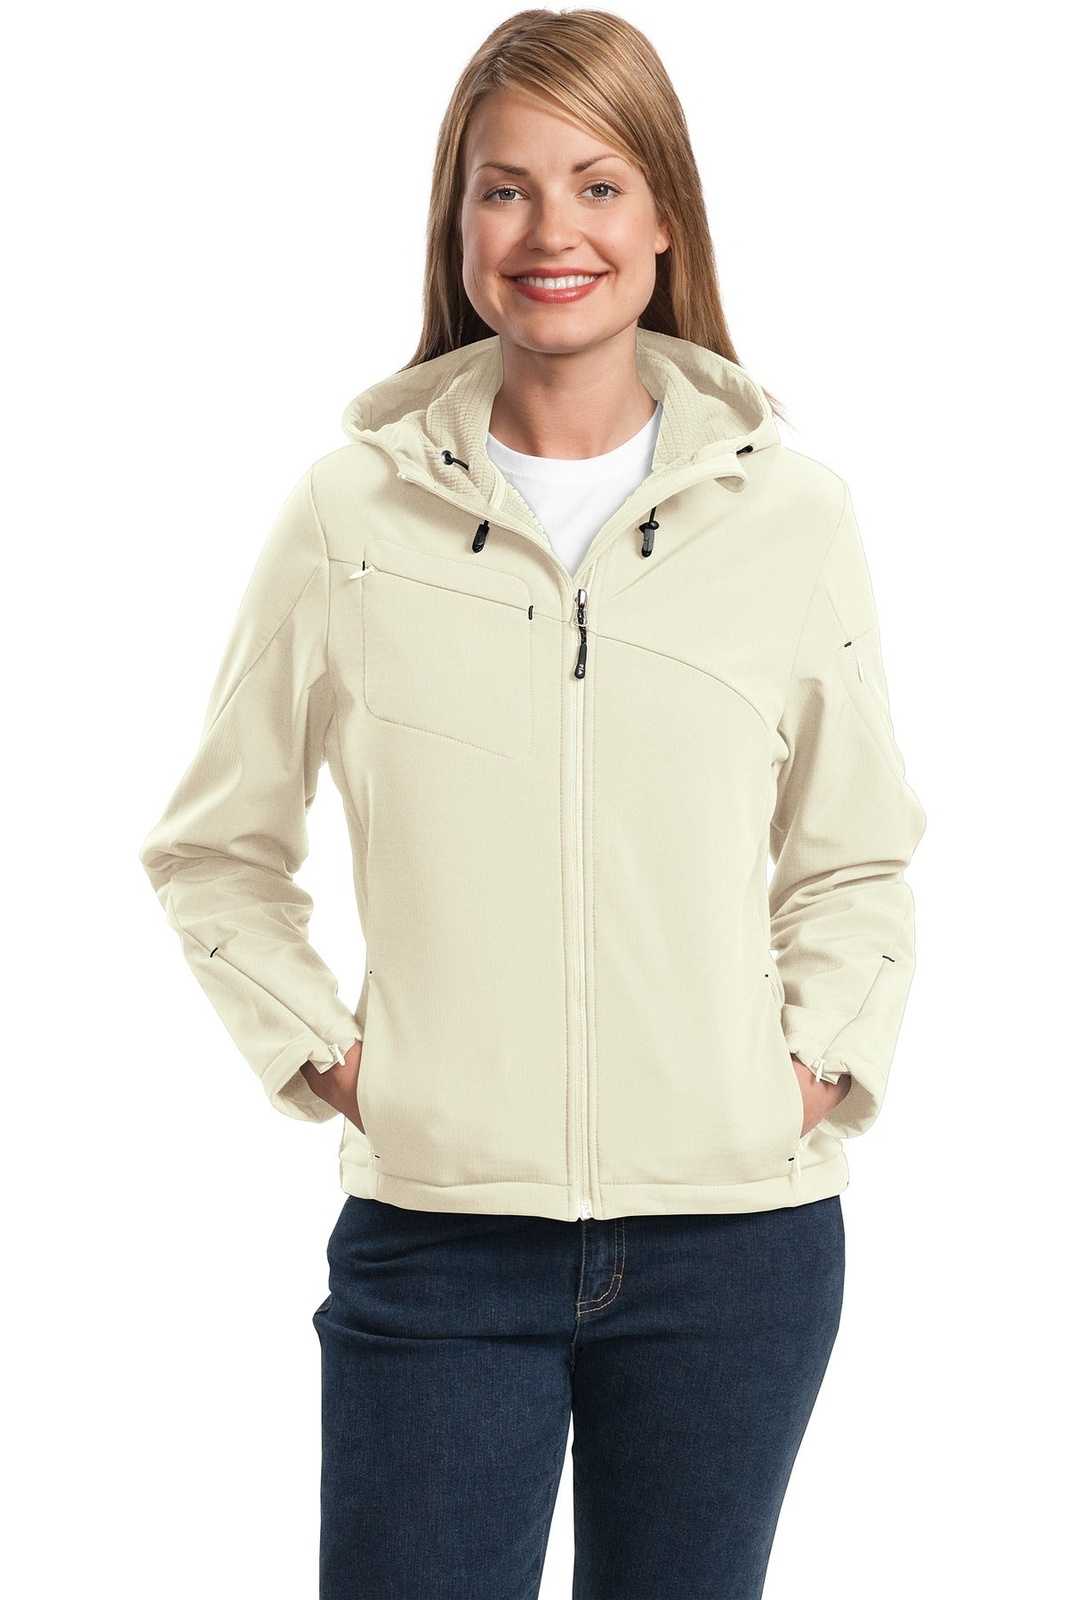 Port Authority L706 Ladies Textured Hooded Soft Shell Jacket - Chalk White Charcoal - HIT a Double - 1